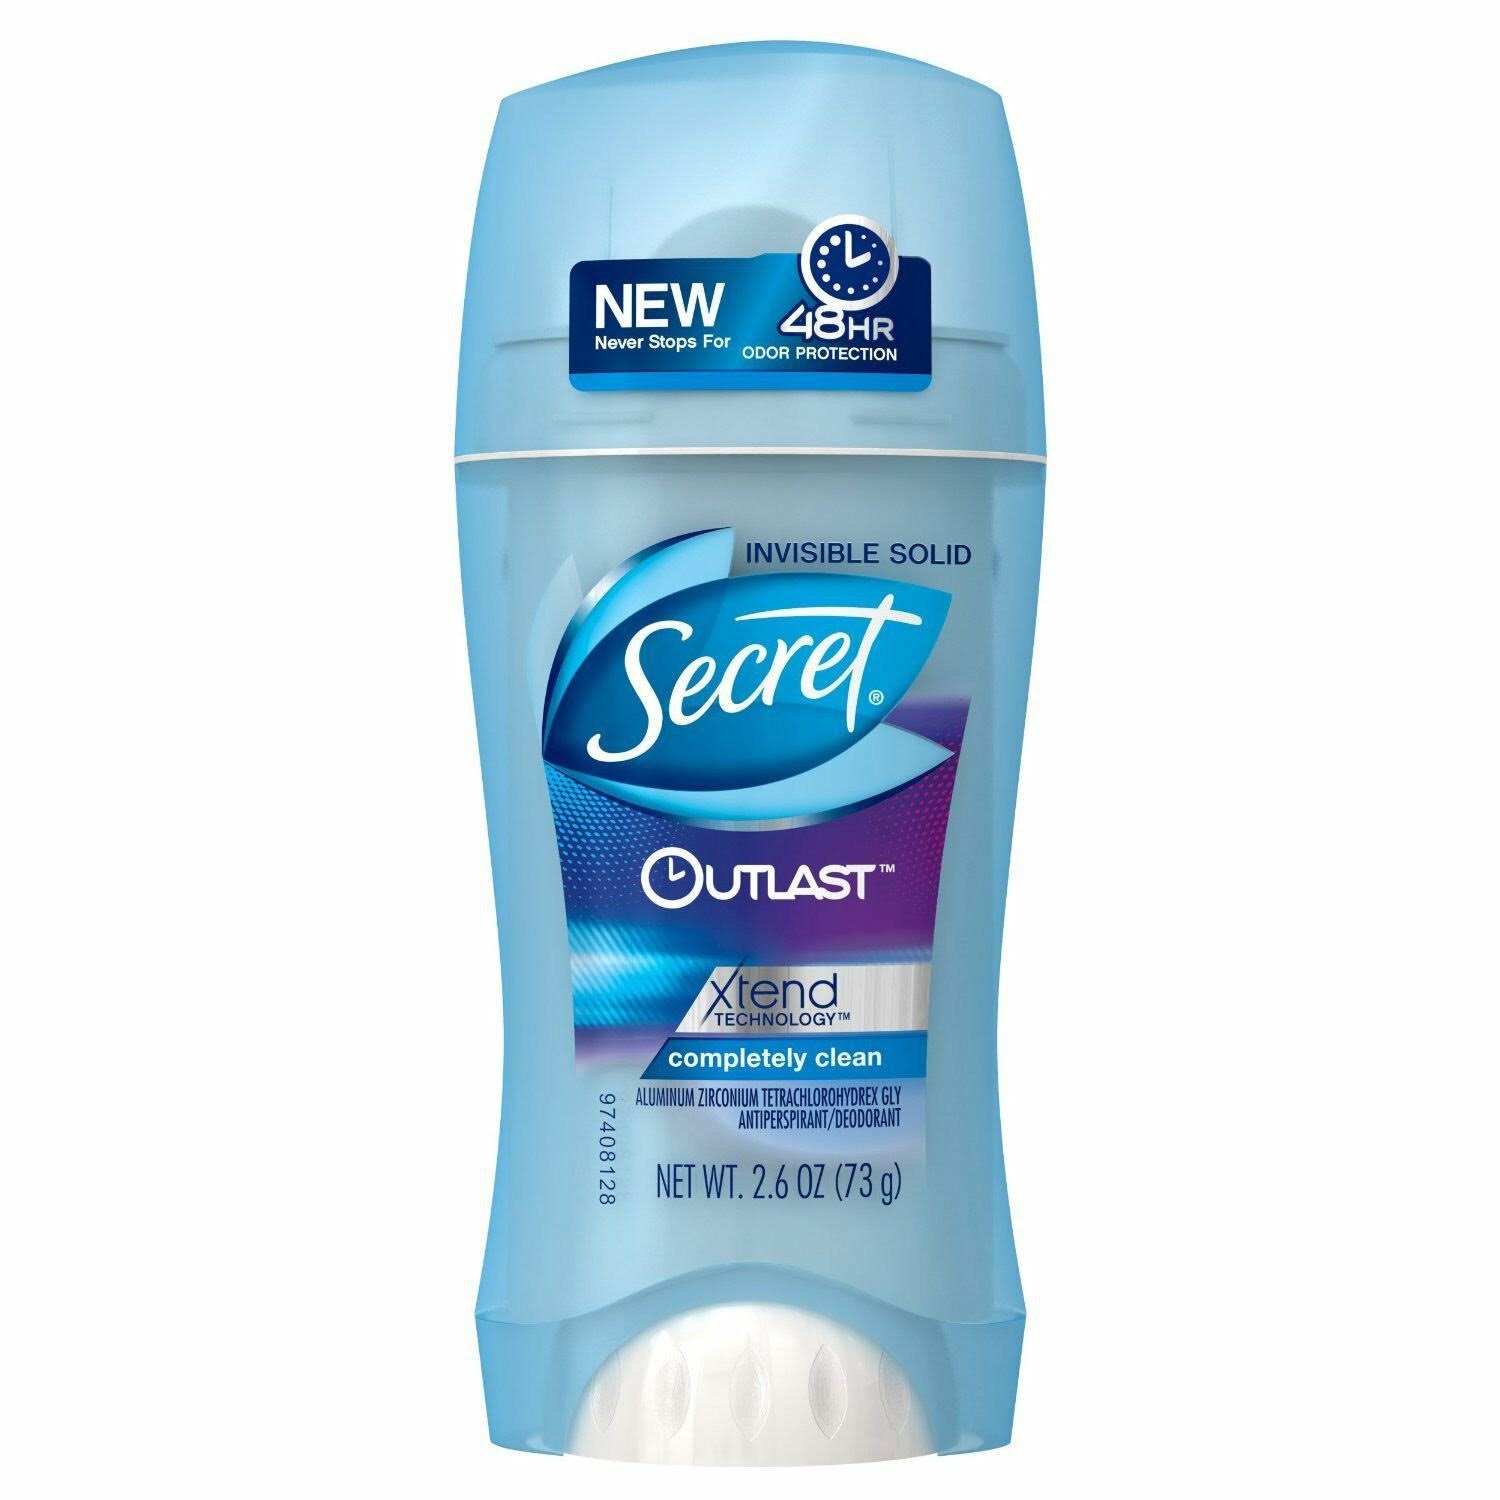 Secret Outlast Women's Invisible Solid Antiperspirant and Deodorant - Completely Clean, 2.6oz